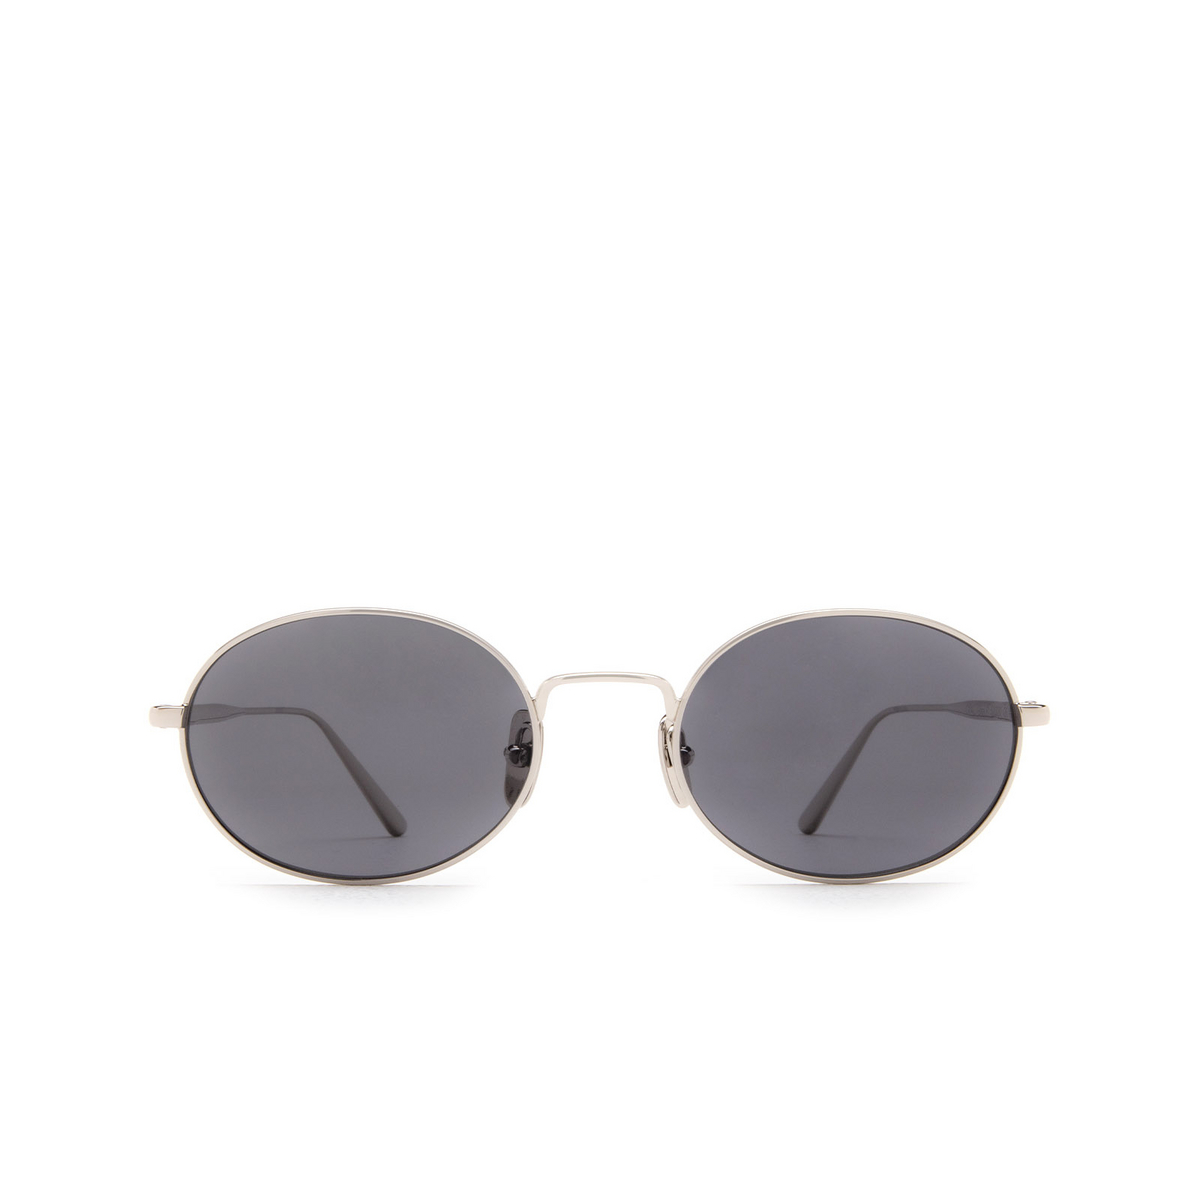 Chimi OVAL Sunglasses GREY - front view